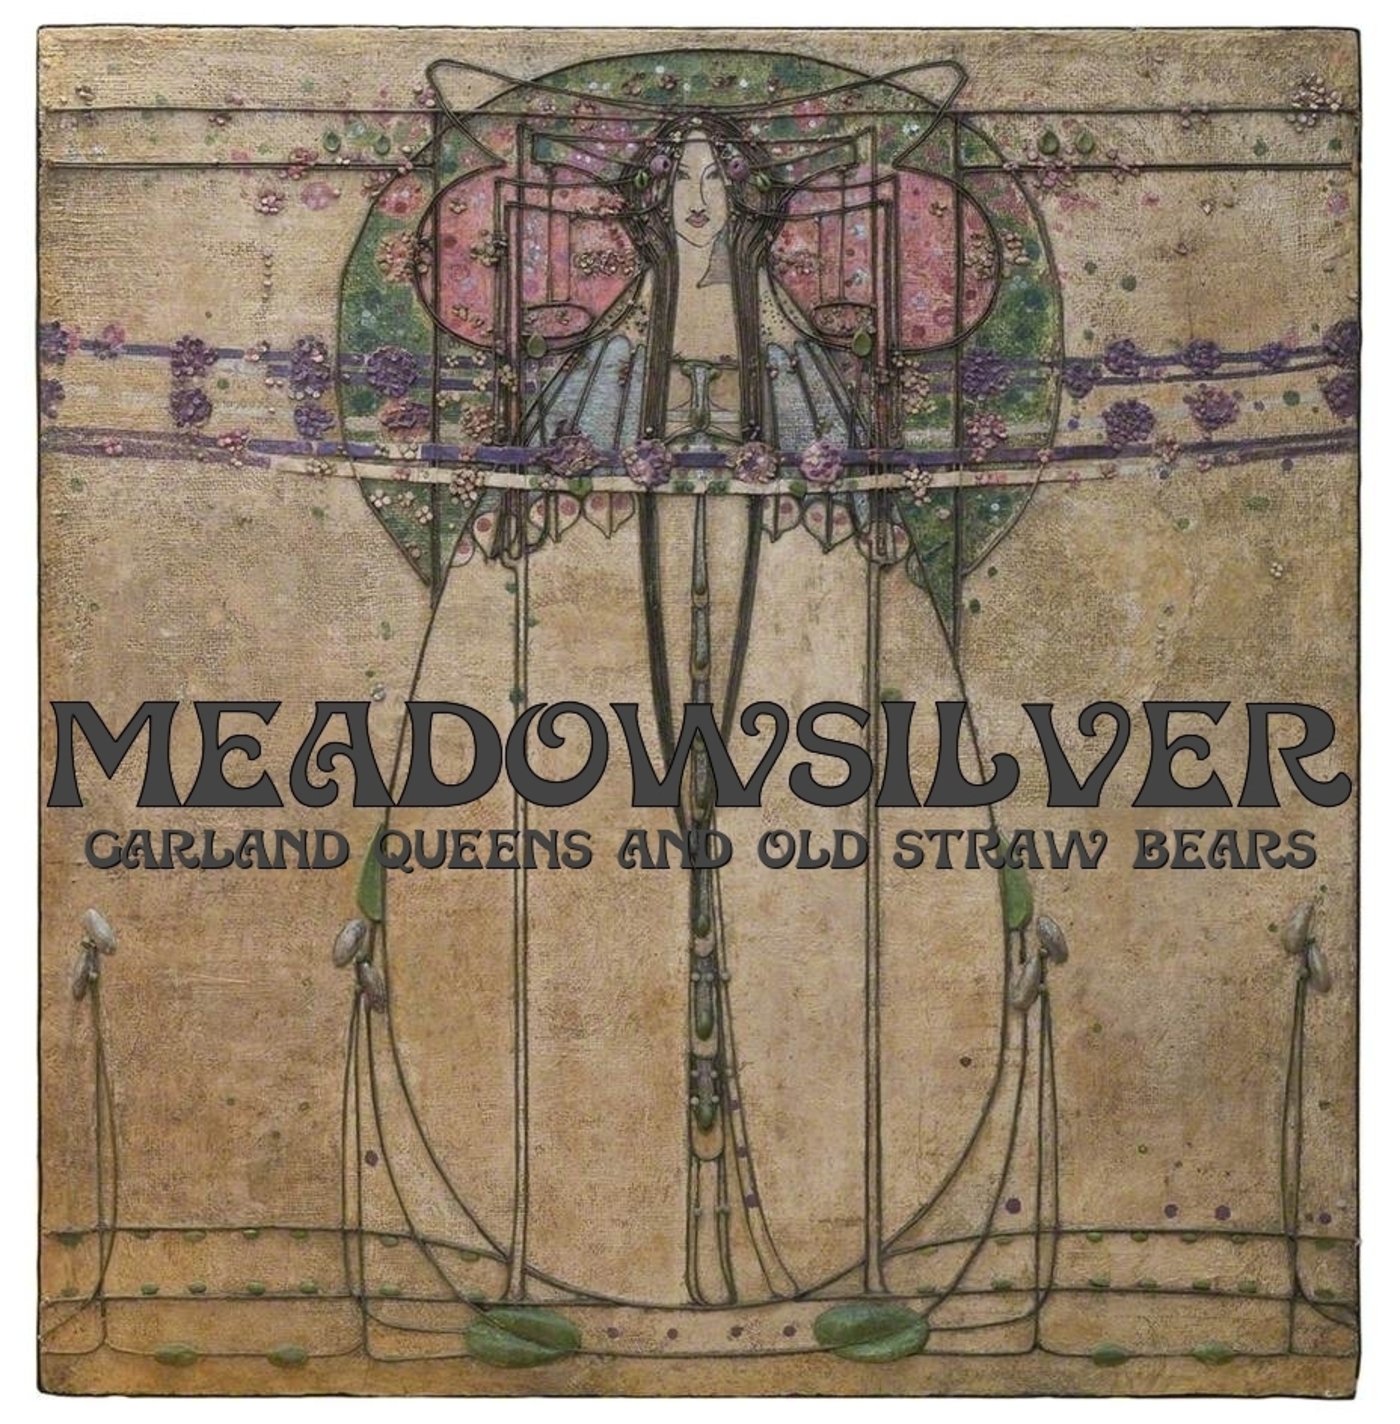 Meadowsilver Garland Queens and Old Straw Bears cover